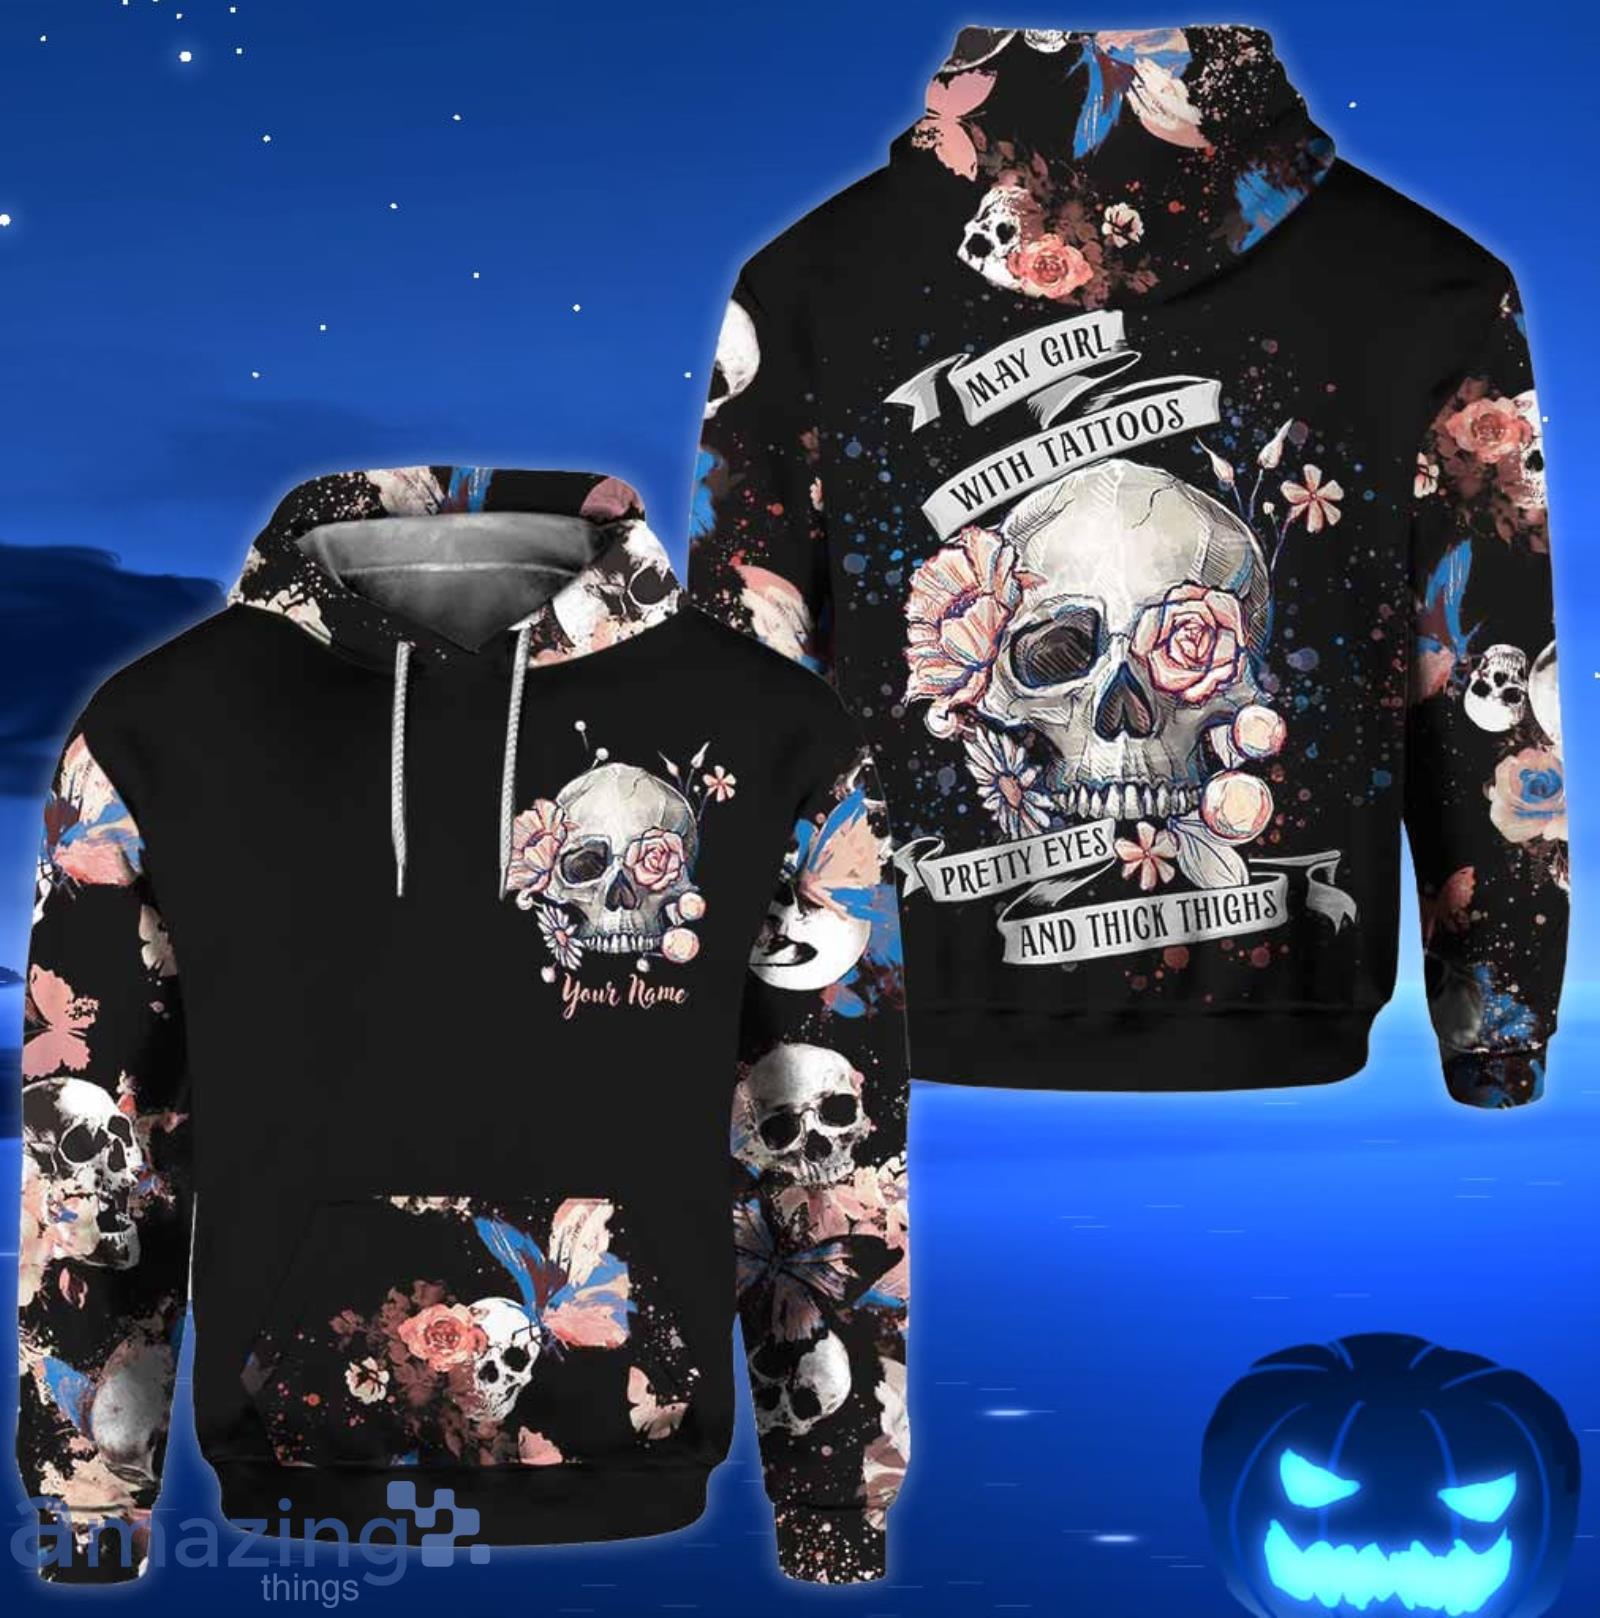 Floral Skulls Combo Outfit Hoodie And Legging For WomenCombo